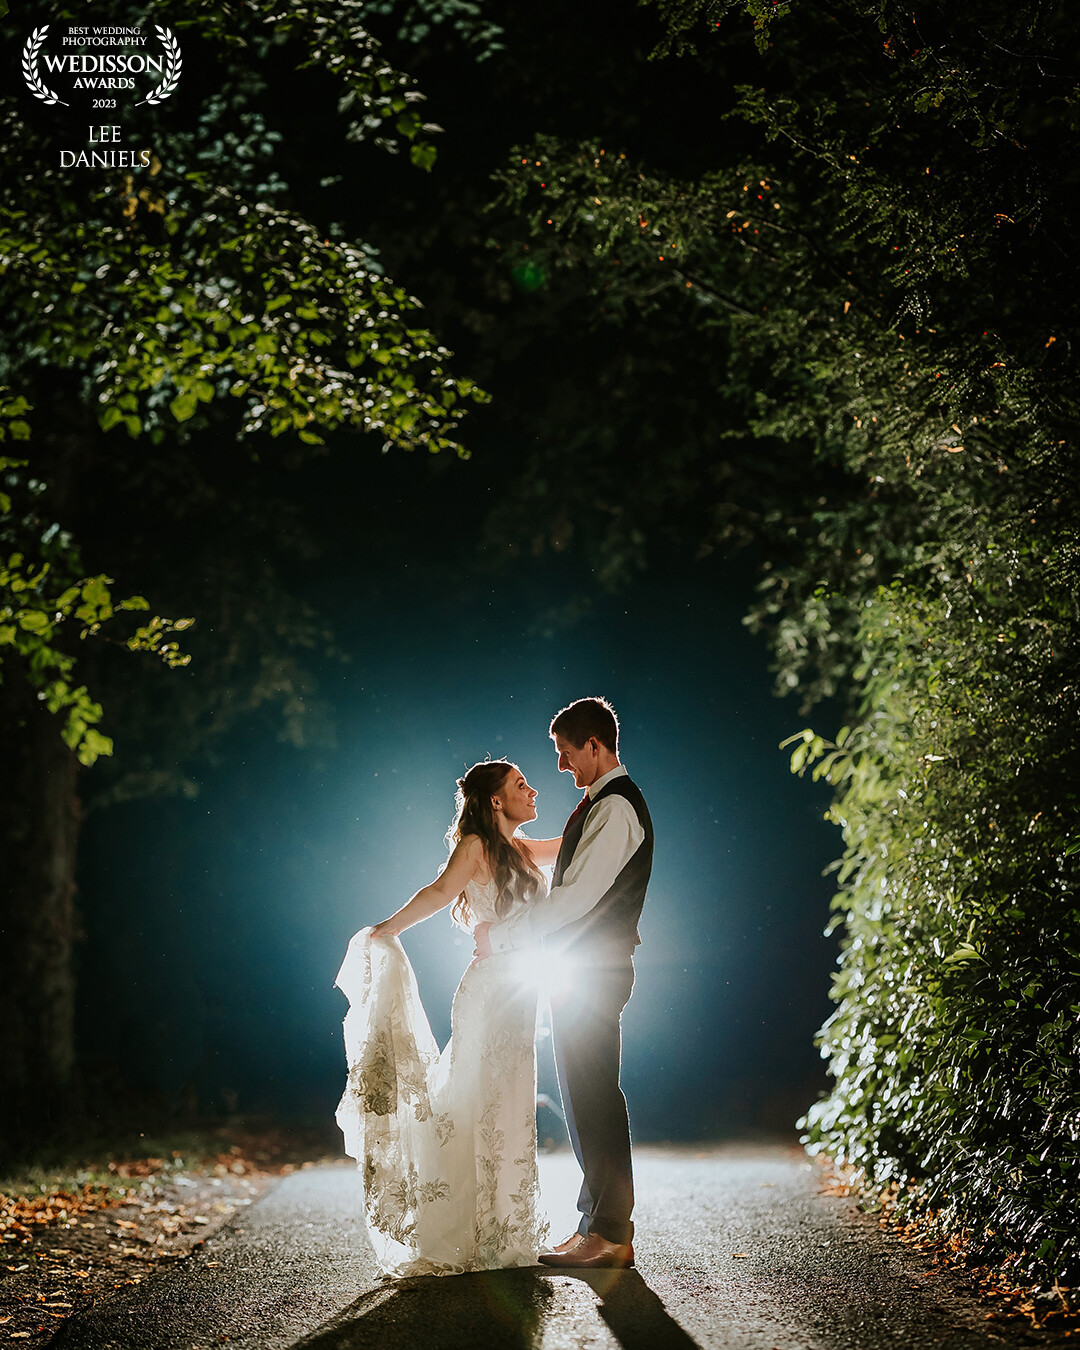 Autumn is upon us, I love the atmosphere the autumn conditions create with backlit flash. This was the last shot of the day, I aimed to compose the couple in-between the trees and I'm pretty happy how it turned out. Wood Hall Spa.